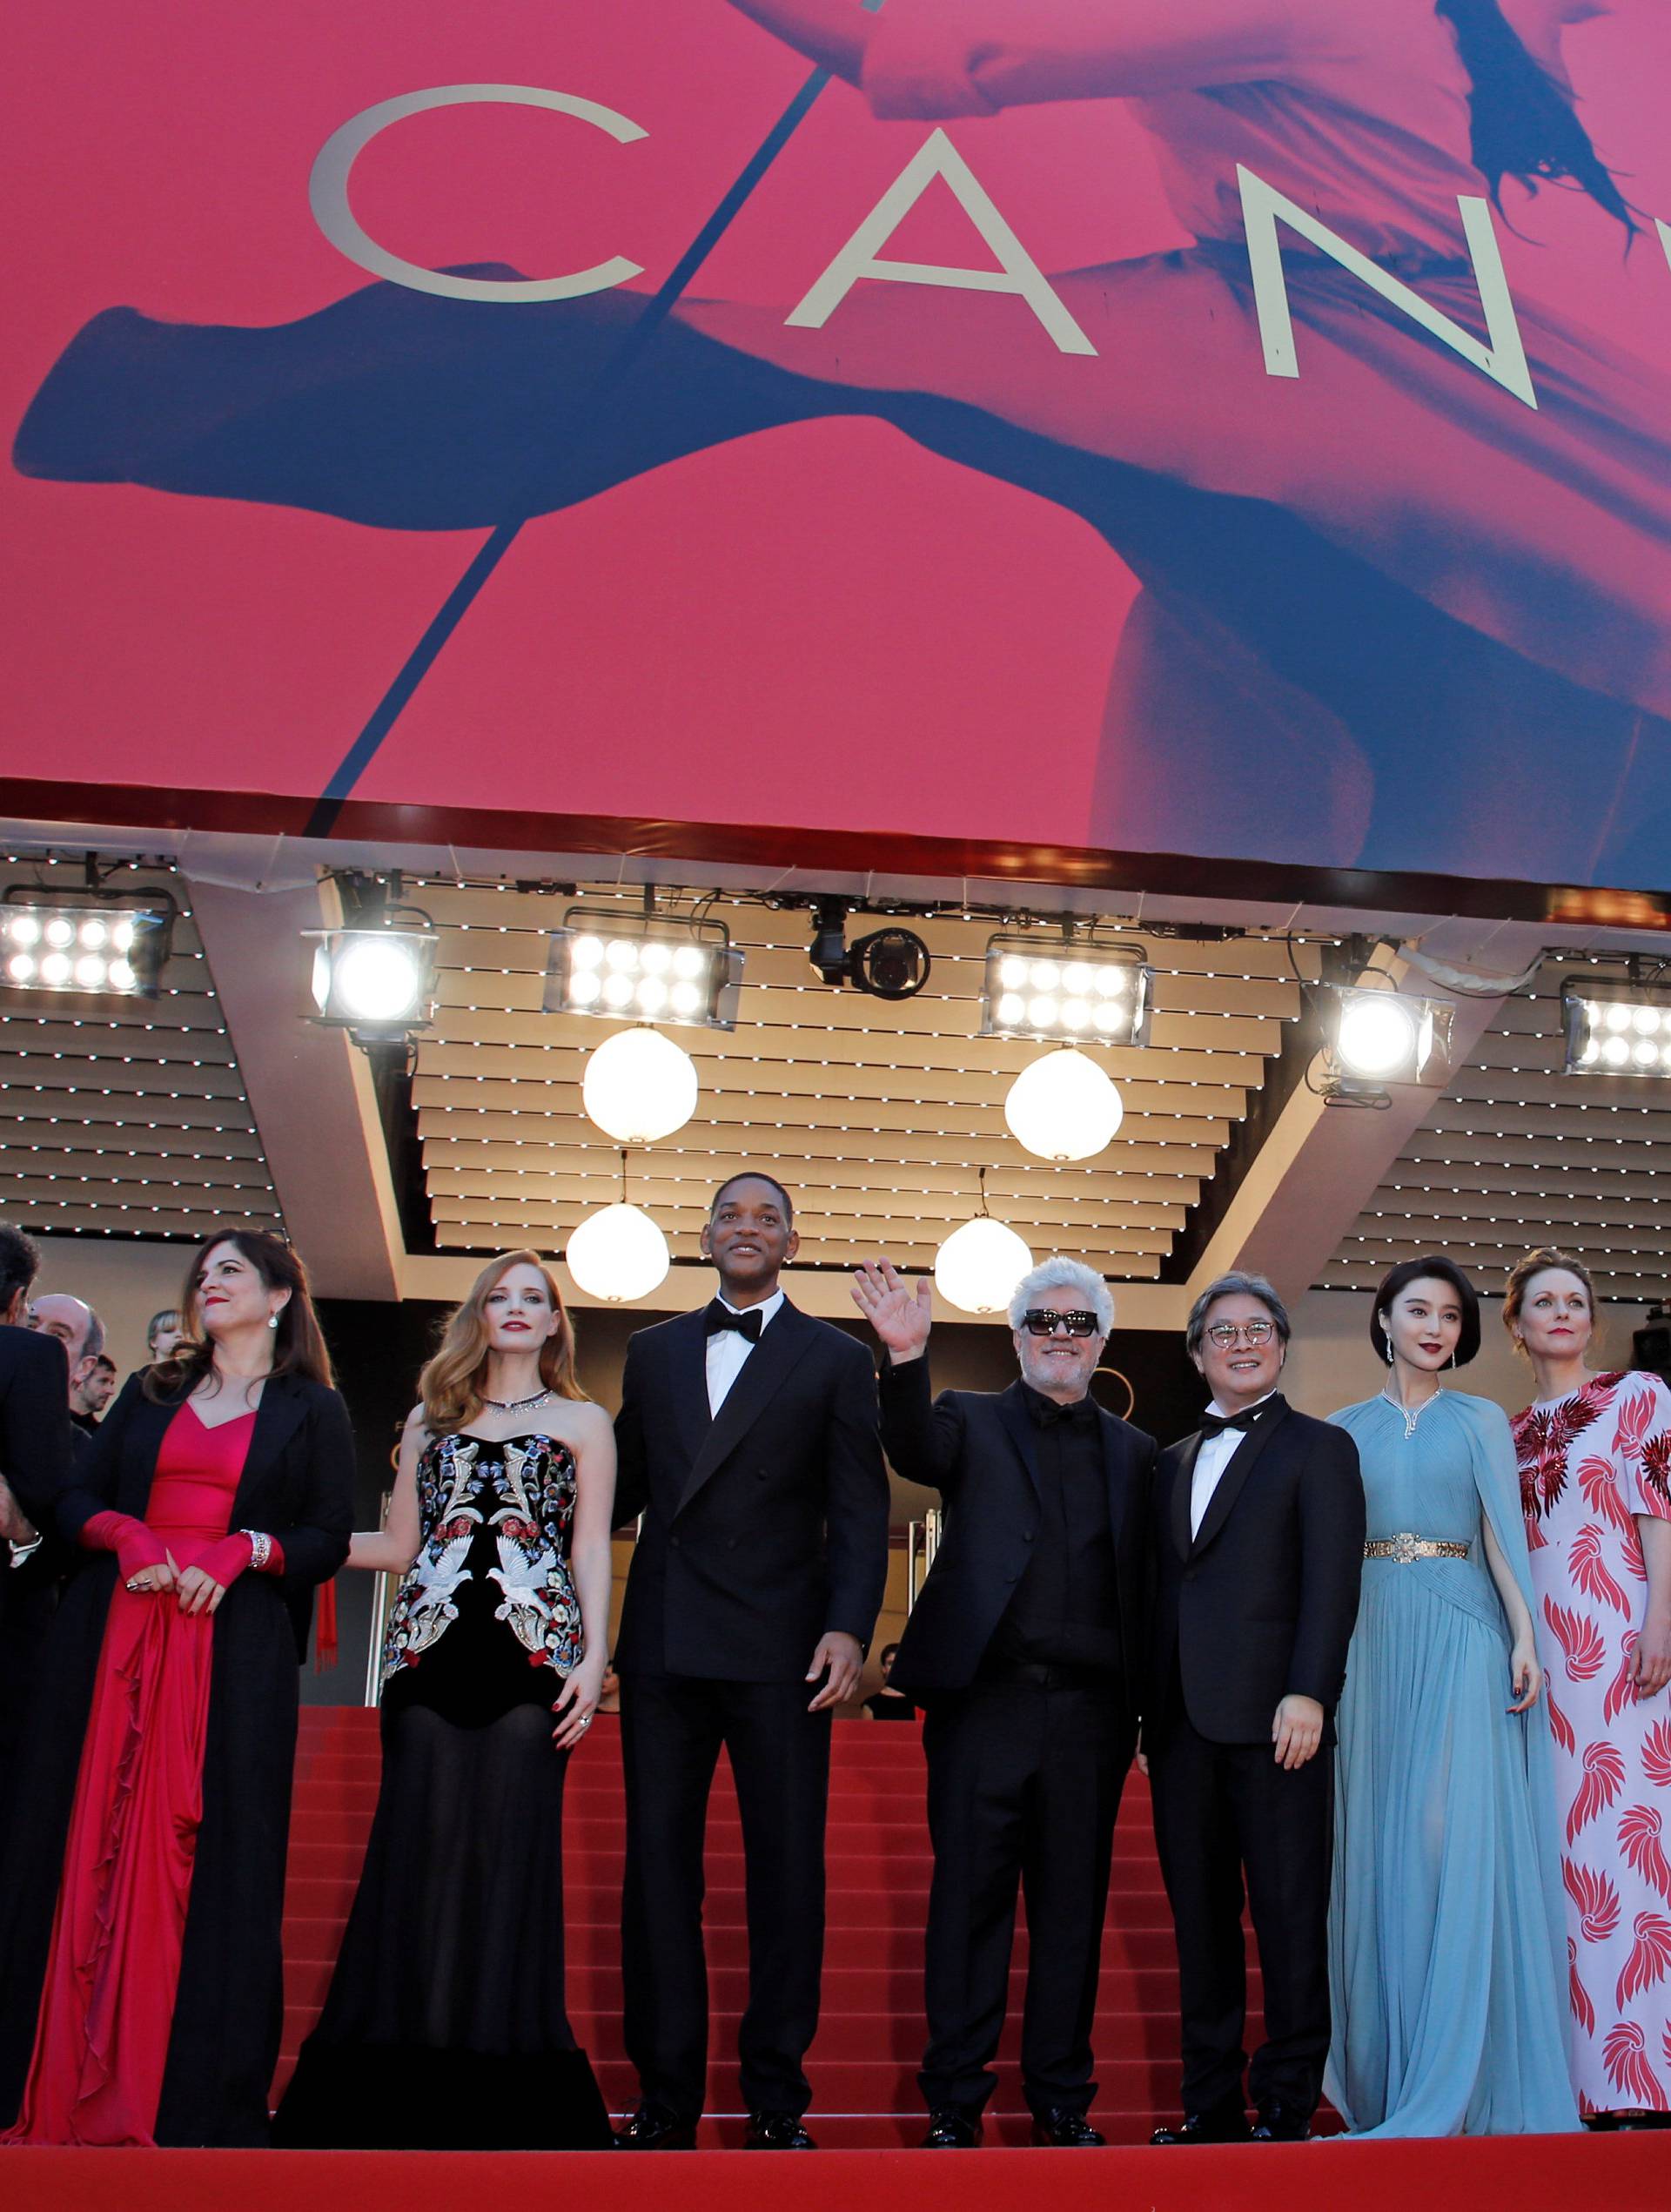 70th Cannes Film Festival - Opening ceremony - Red Carpet Arrivals